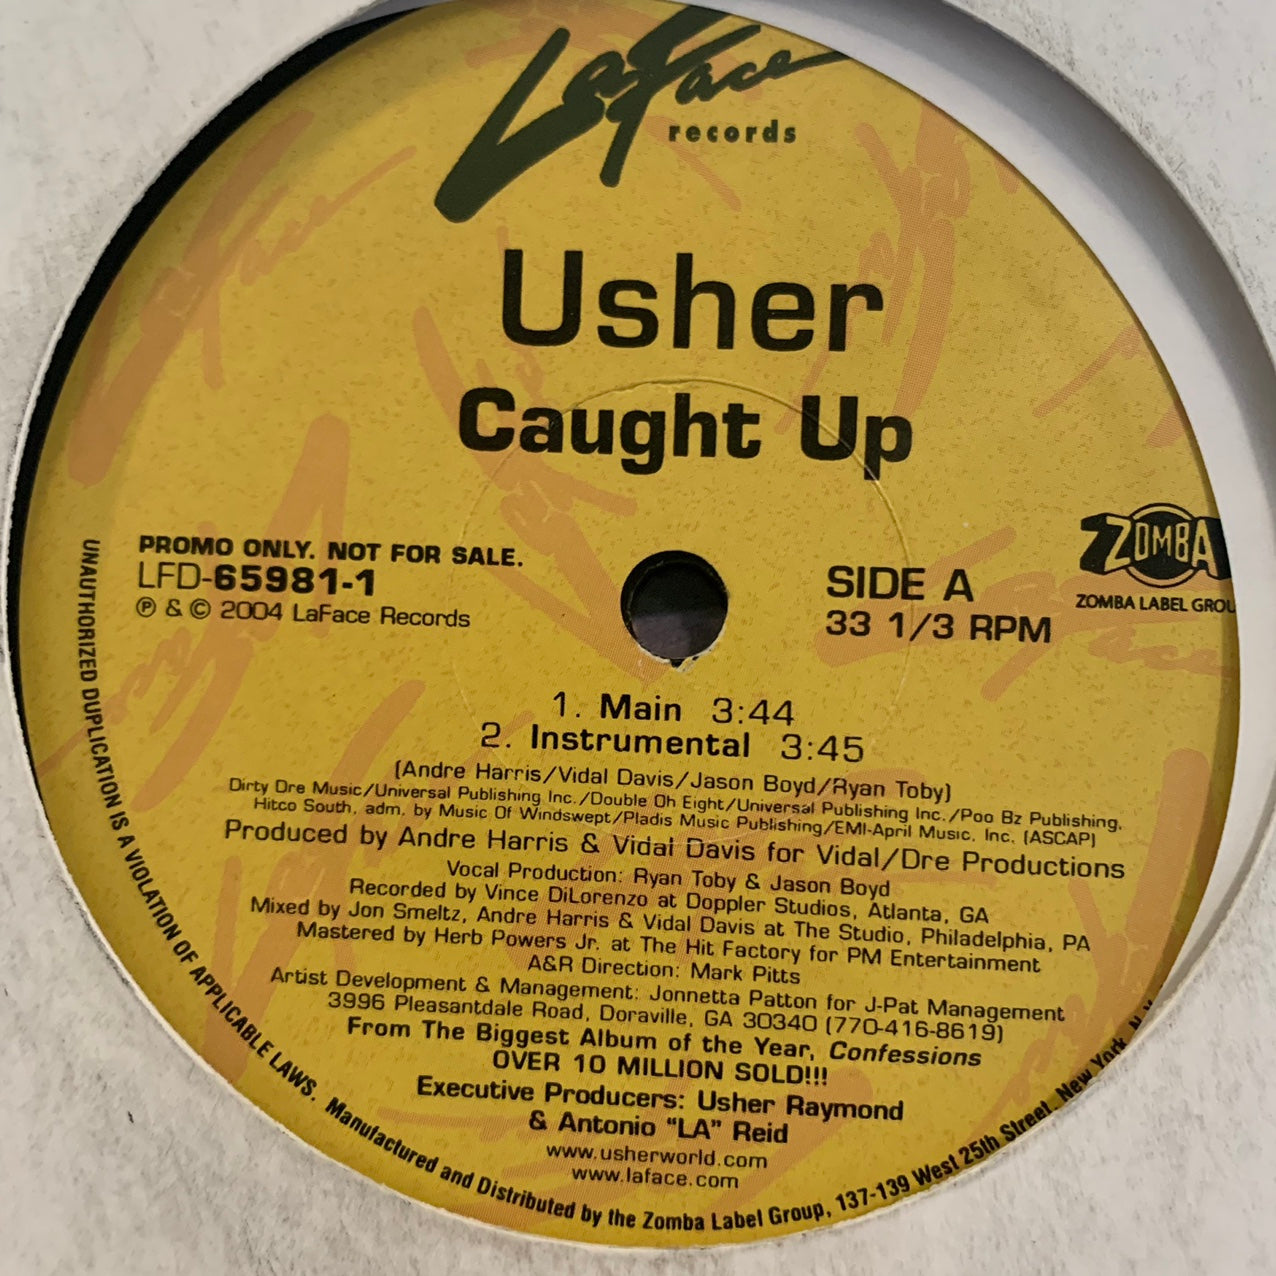 Usher “Caught Up” 4 Version 12inch Vinyl, eaturing Main, Instrumental and Remix’s Feat Fabolous